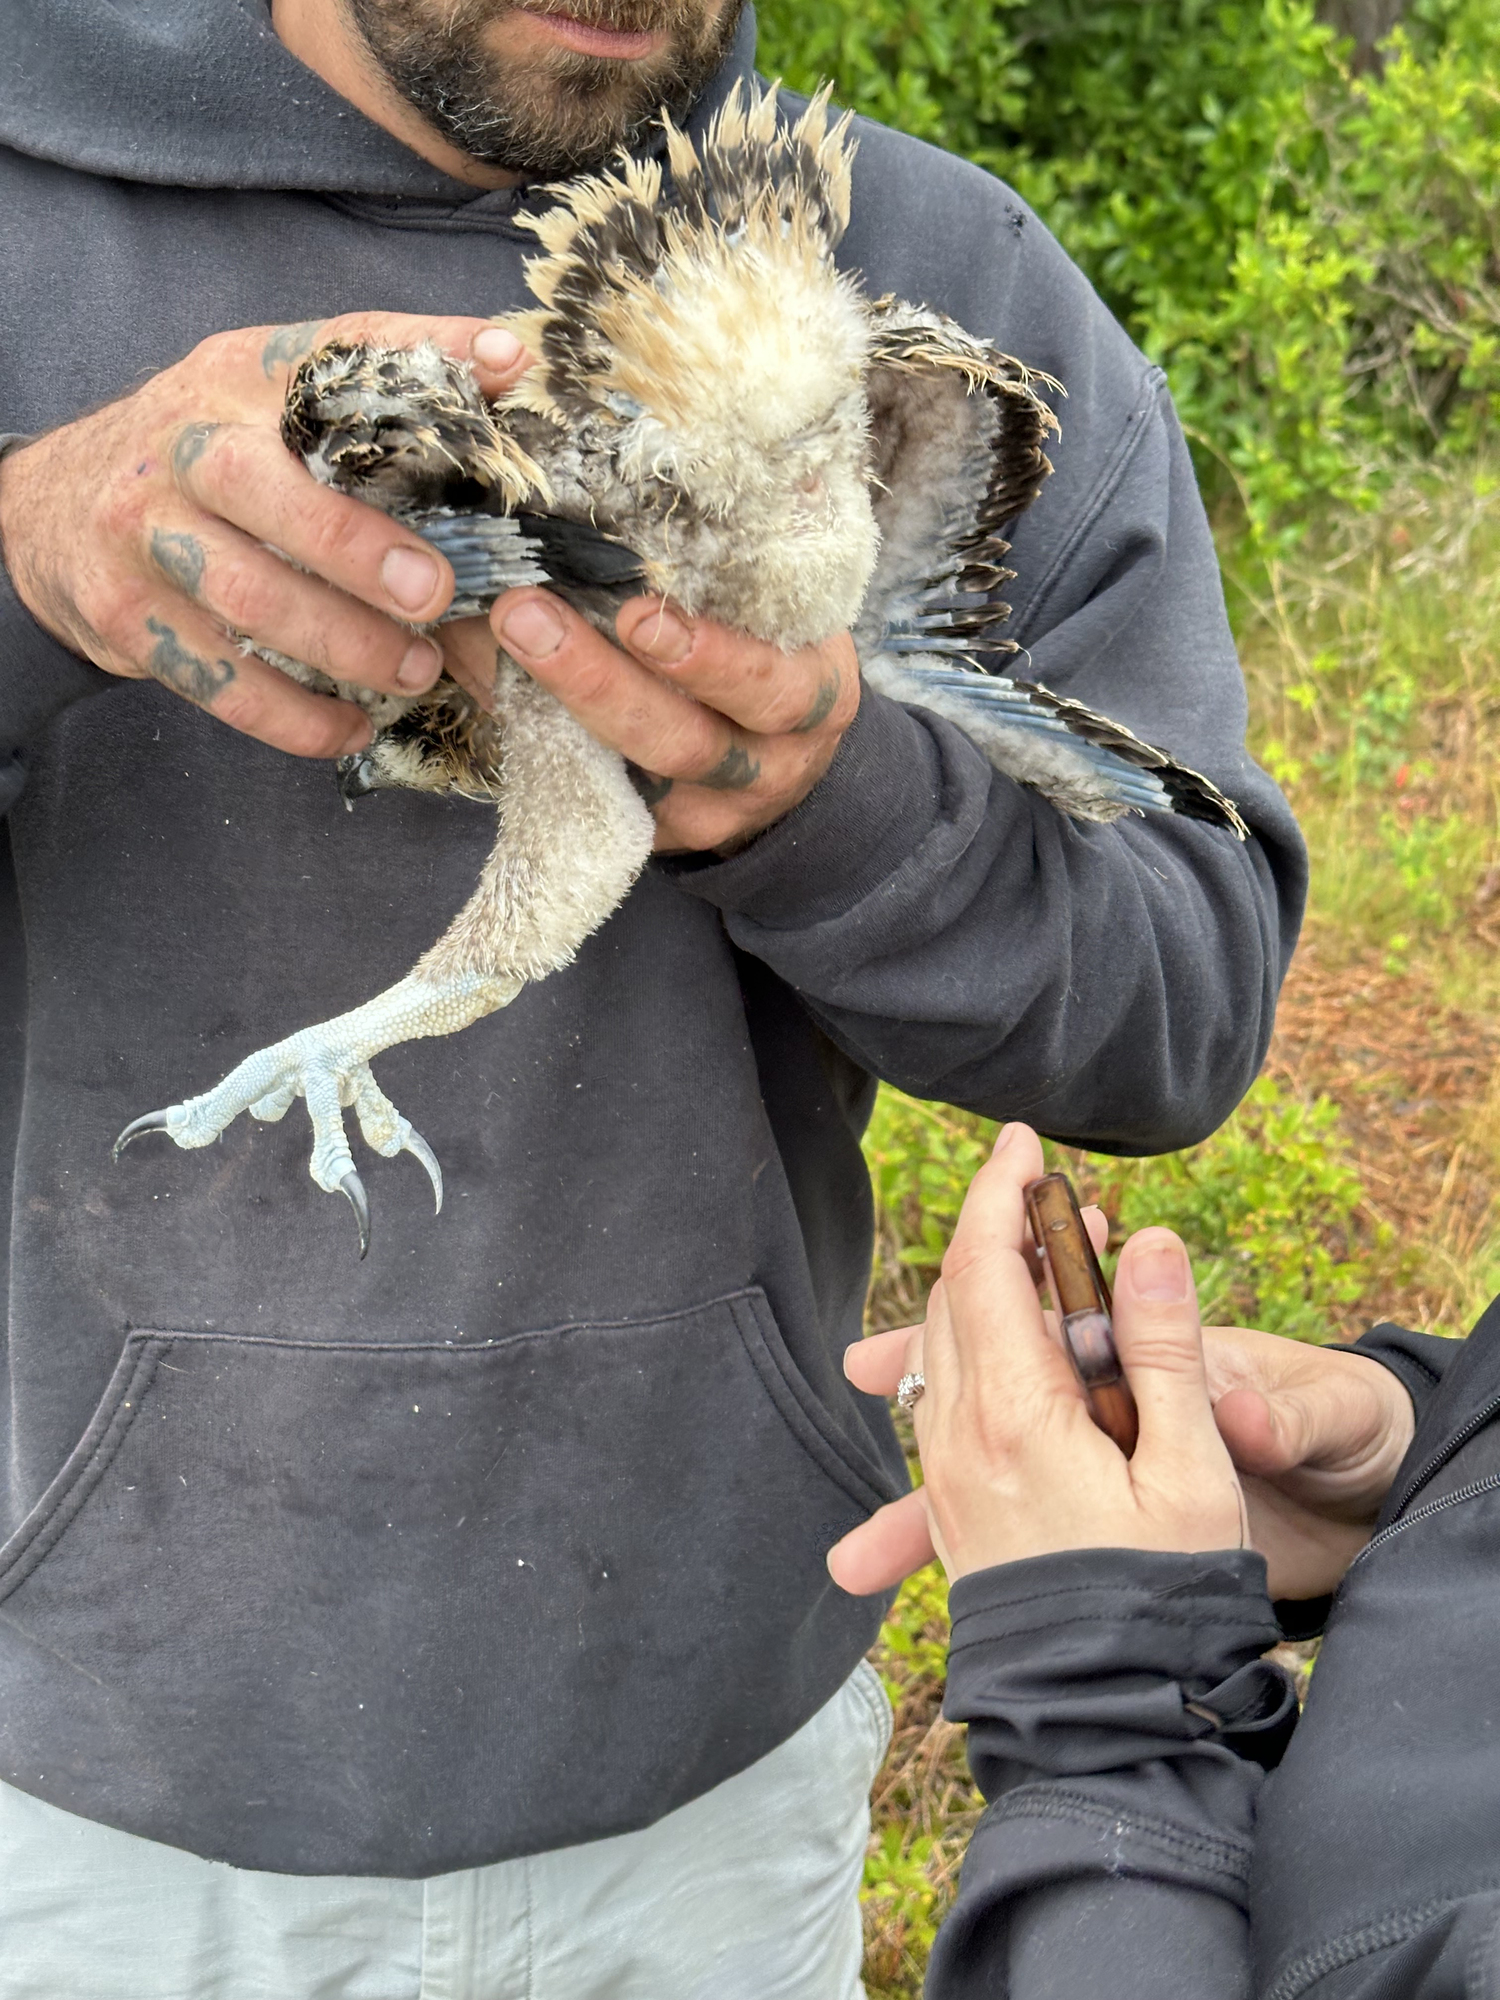 Joe Rocco of the Broken Antler Wildlife Search and Rescue and Missy Hargraves of the Evelyn Alexander Wildlife Rescue Center look over an injured osprey chick at The Bridge Golf Club on Sunday morning.